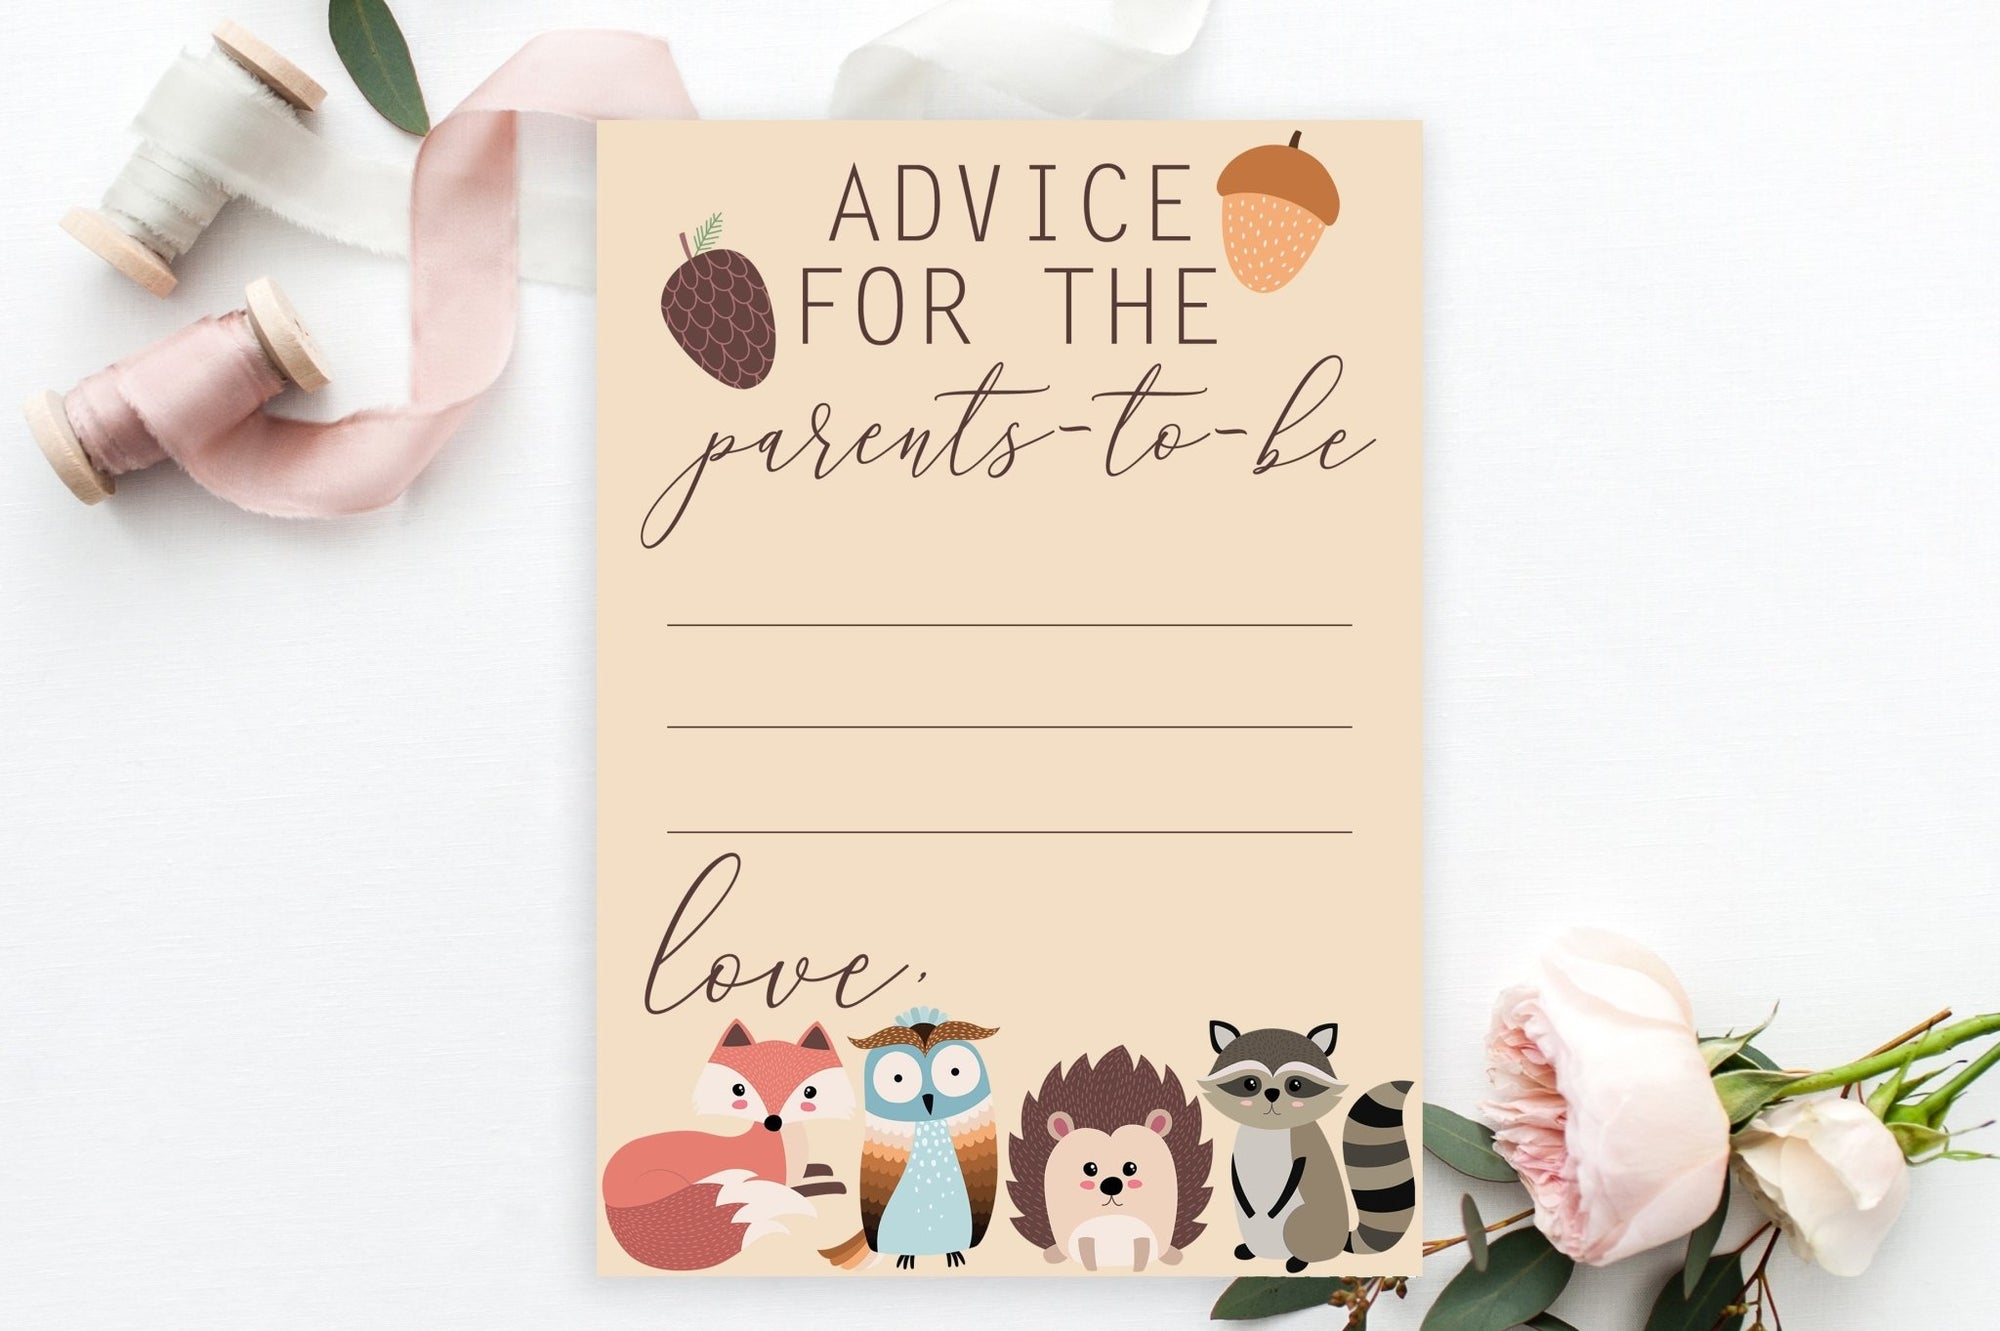 Advice for Parents-To-Be - Woodland Printable - Pretty Collected